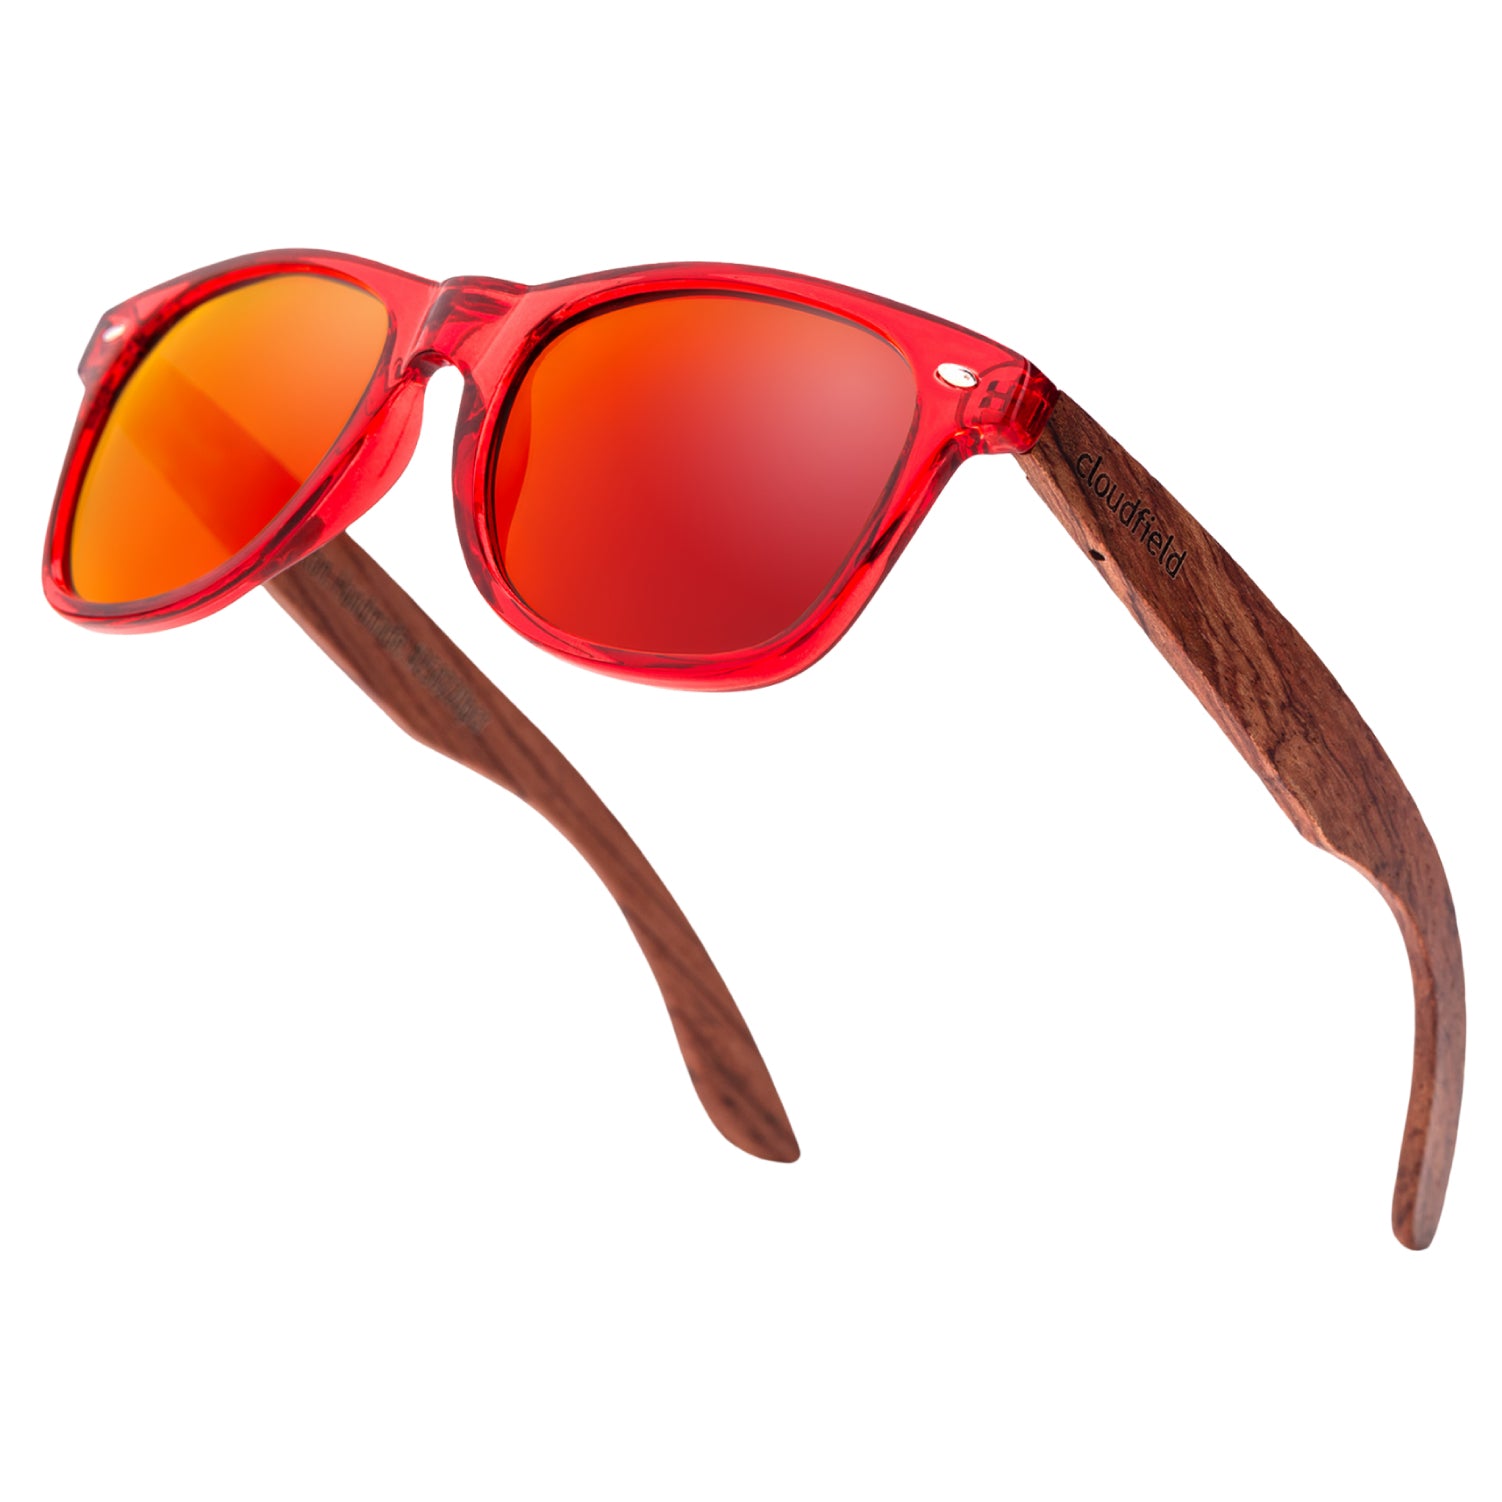 Cloudfield Unisex Polarized Wood Sunglasses - Red